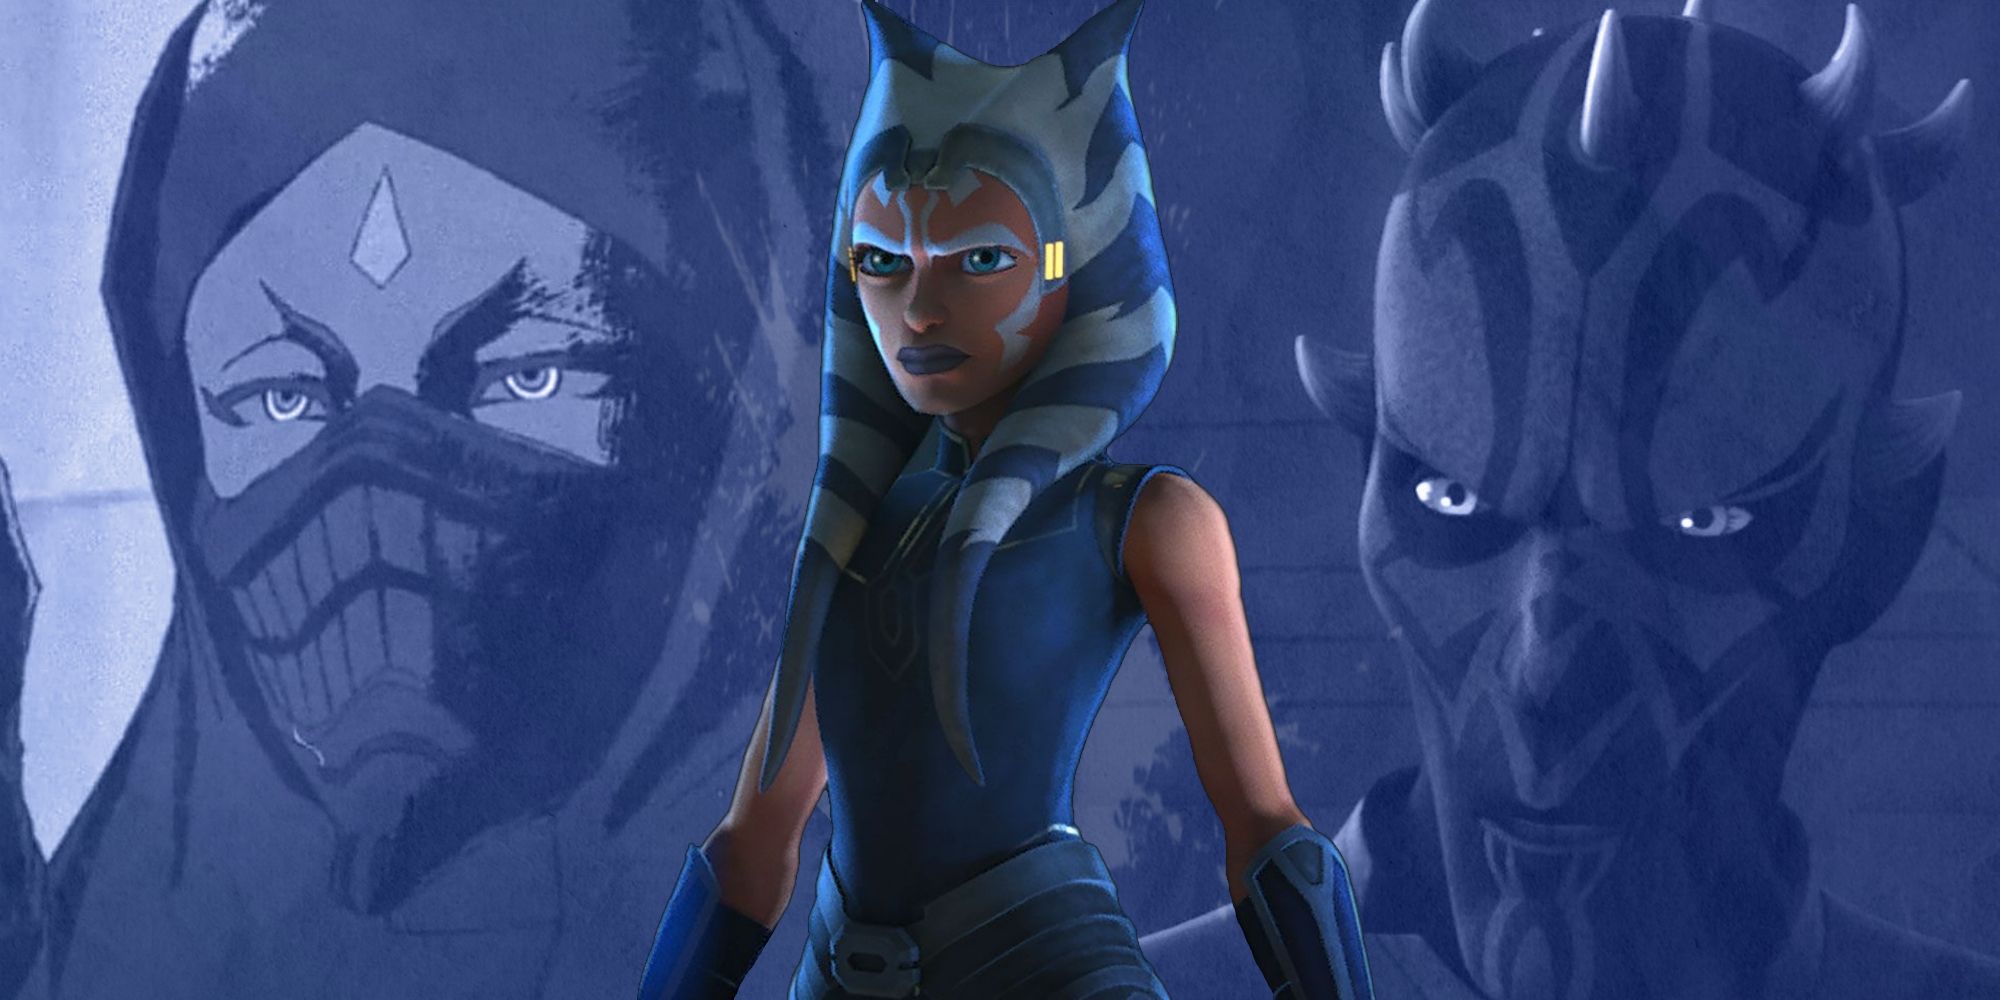 Ahsoka Tano from 'Star Wars: The Clone Wars' pictured beside the Female Bandit Leader from 'Star Wars: Visions' and Darth Maul